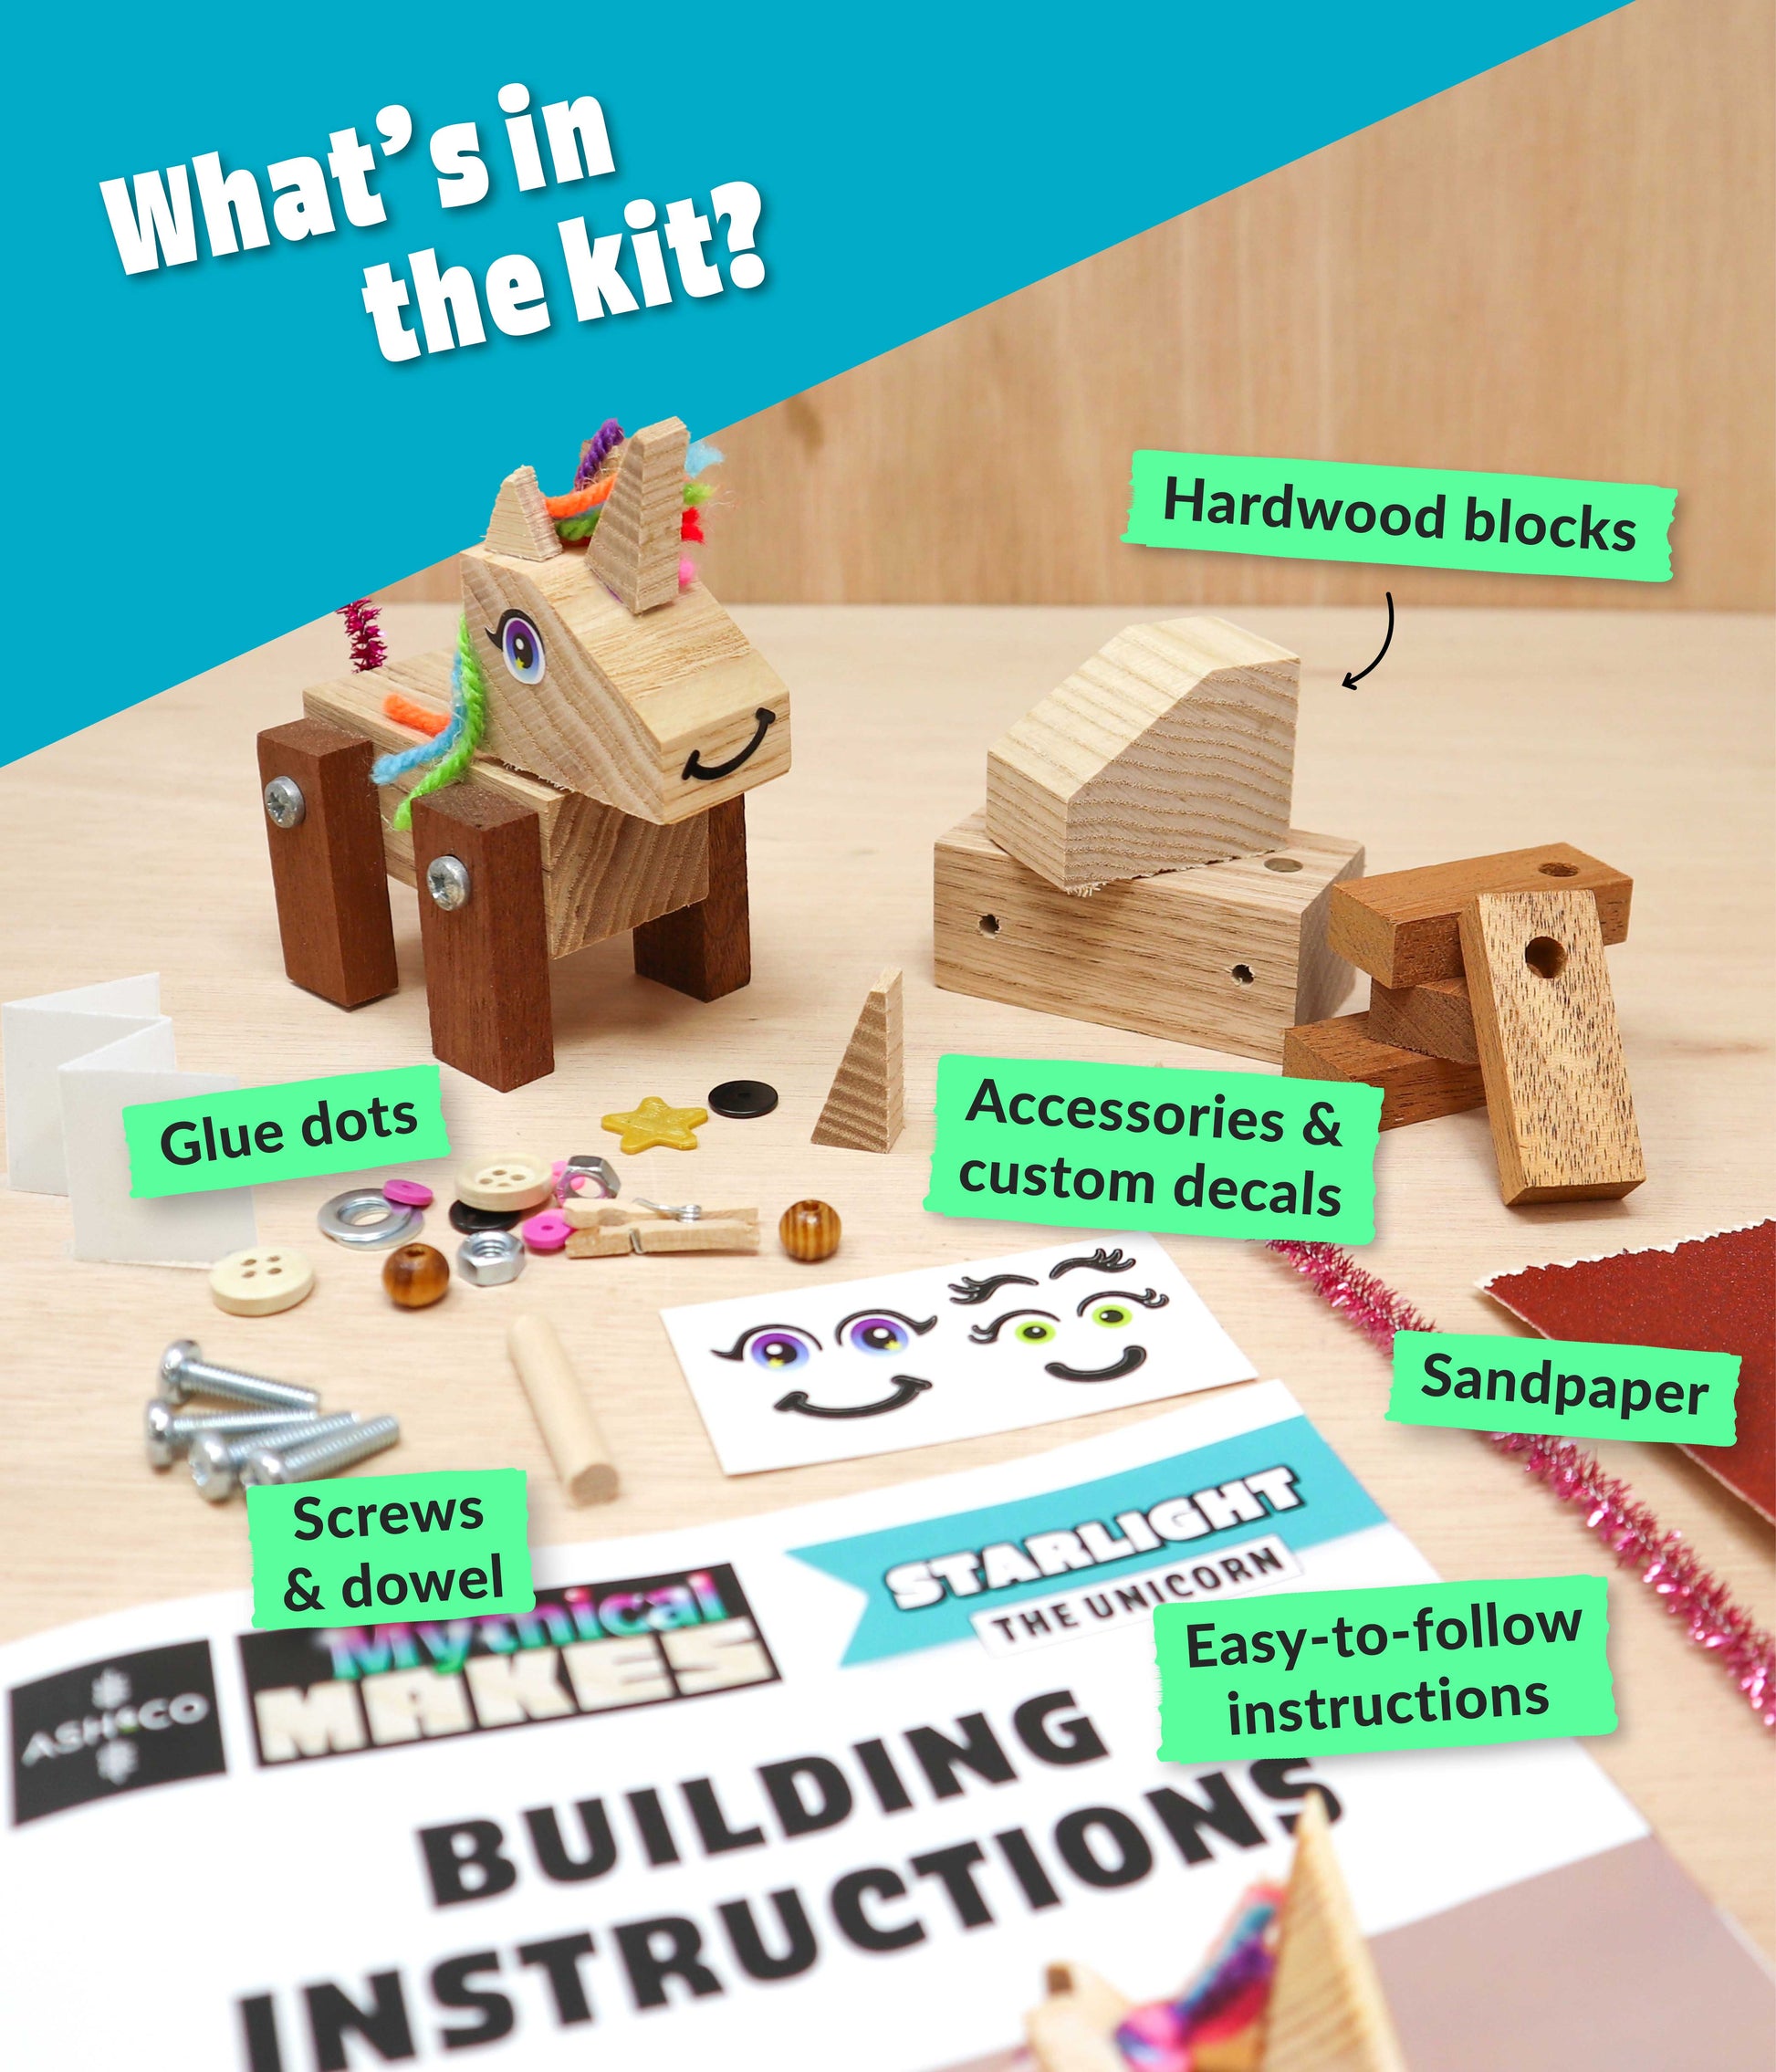 All the materials provided in the unicorn craft kit for kids laid out neatly, ready for a fun crafting session.